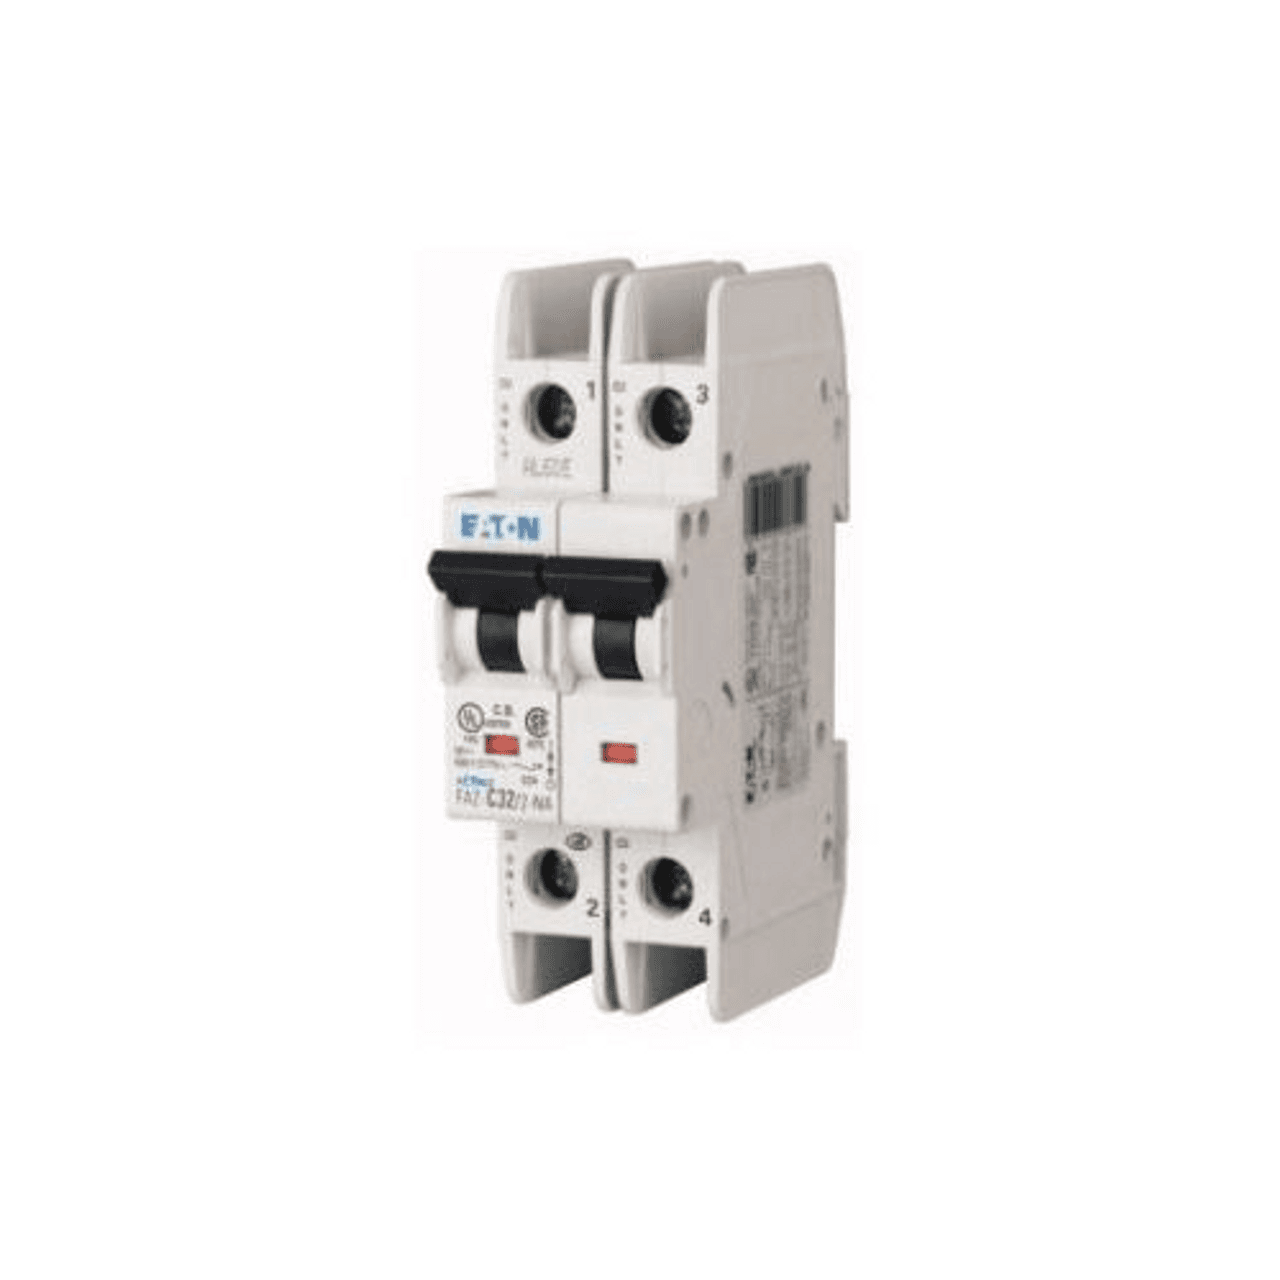 Eaton FAZ-C16/2-NA 277/480 VAC 50/60 Hz, 16 A, 2-Pole, 10/14 kA, 5 to 10 x Rated Current, Screw Terminal, DIN Rail Mount, Standard Packaging, C-Curve, Current Limiting, Thermal Magnetic